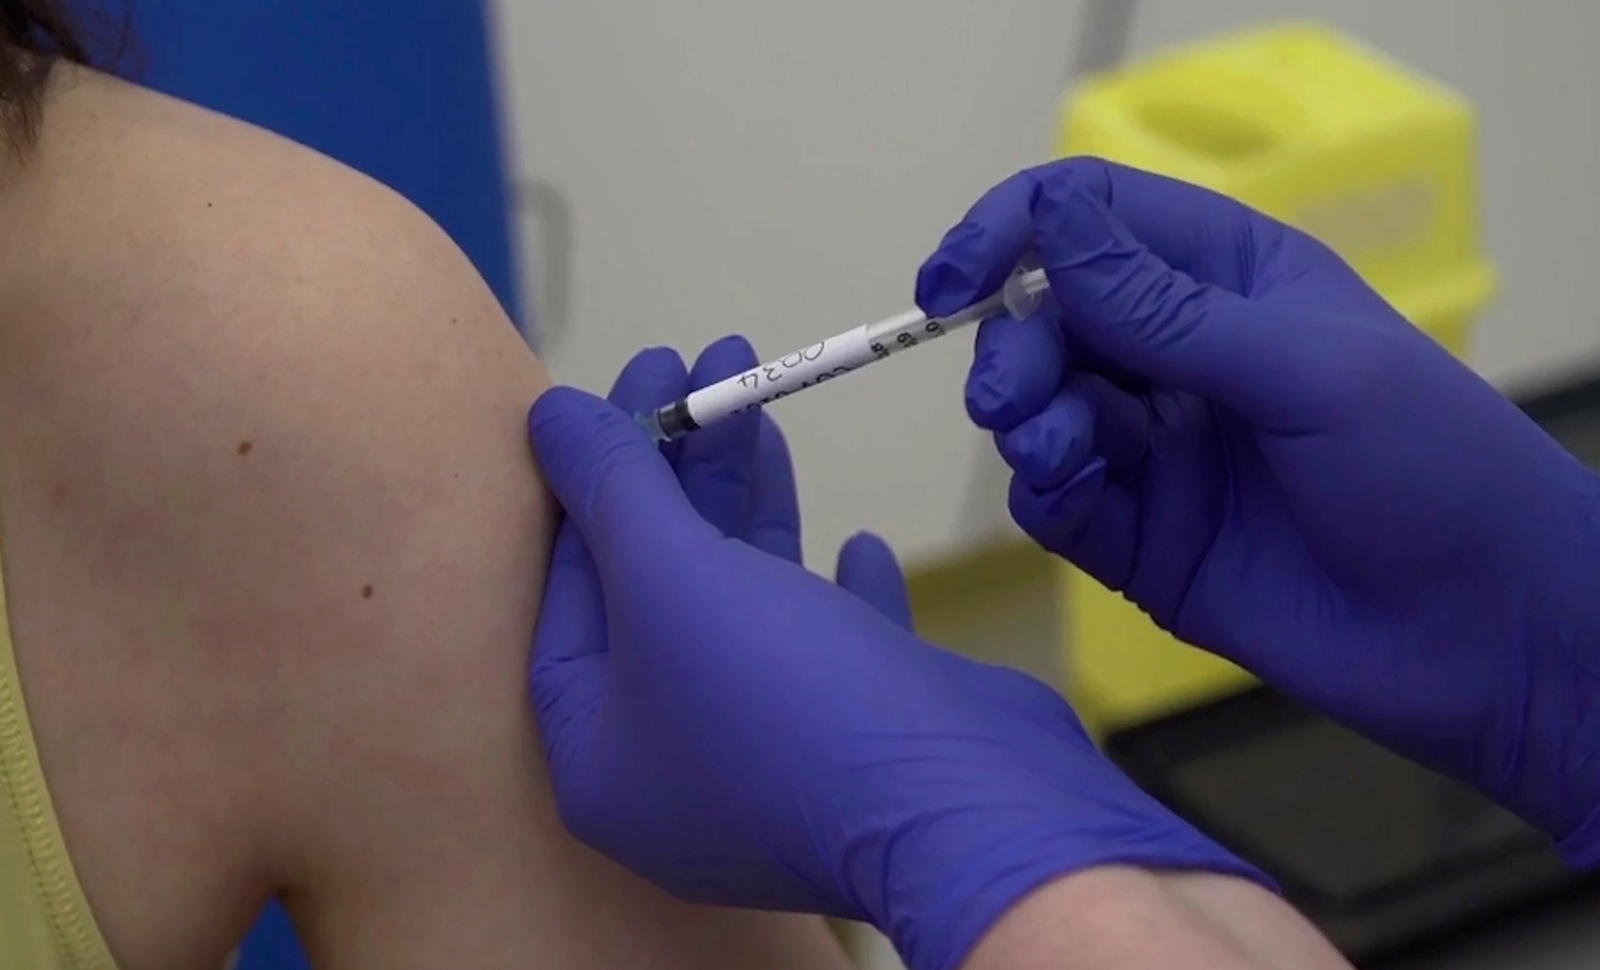 A screen grab taken from video issued by Britain's Oxford University, shows microbiologist Elisa Granato, being injected as part of the first human trials in the UK for a potential coronavirus vaccine, untaken by Oxford University, England, on Thursday, April 23.